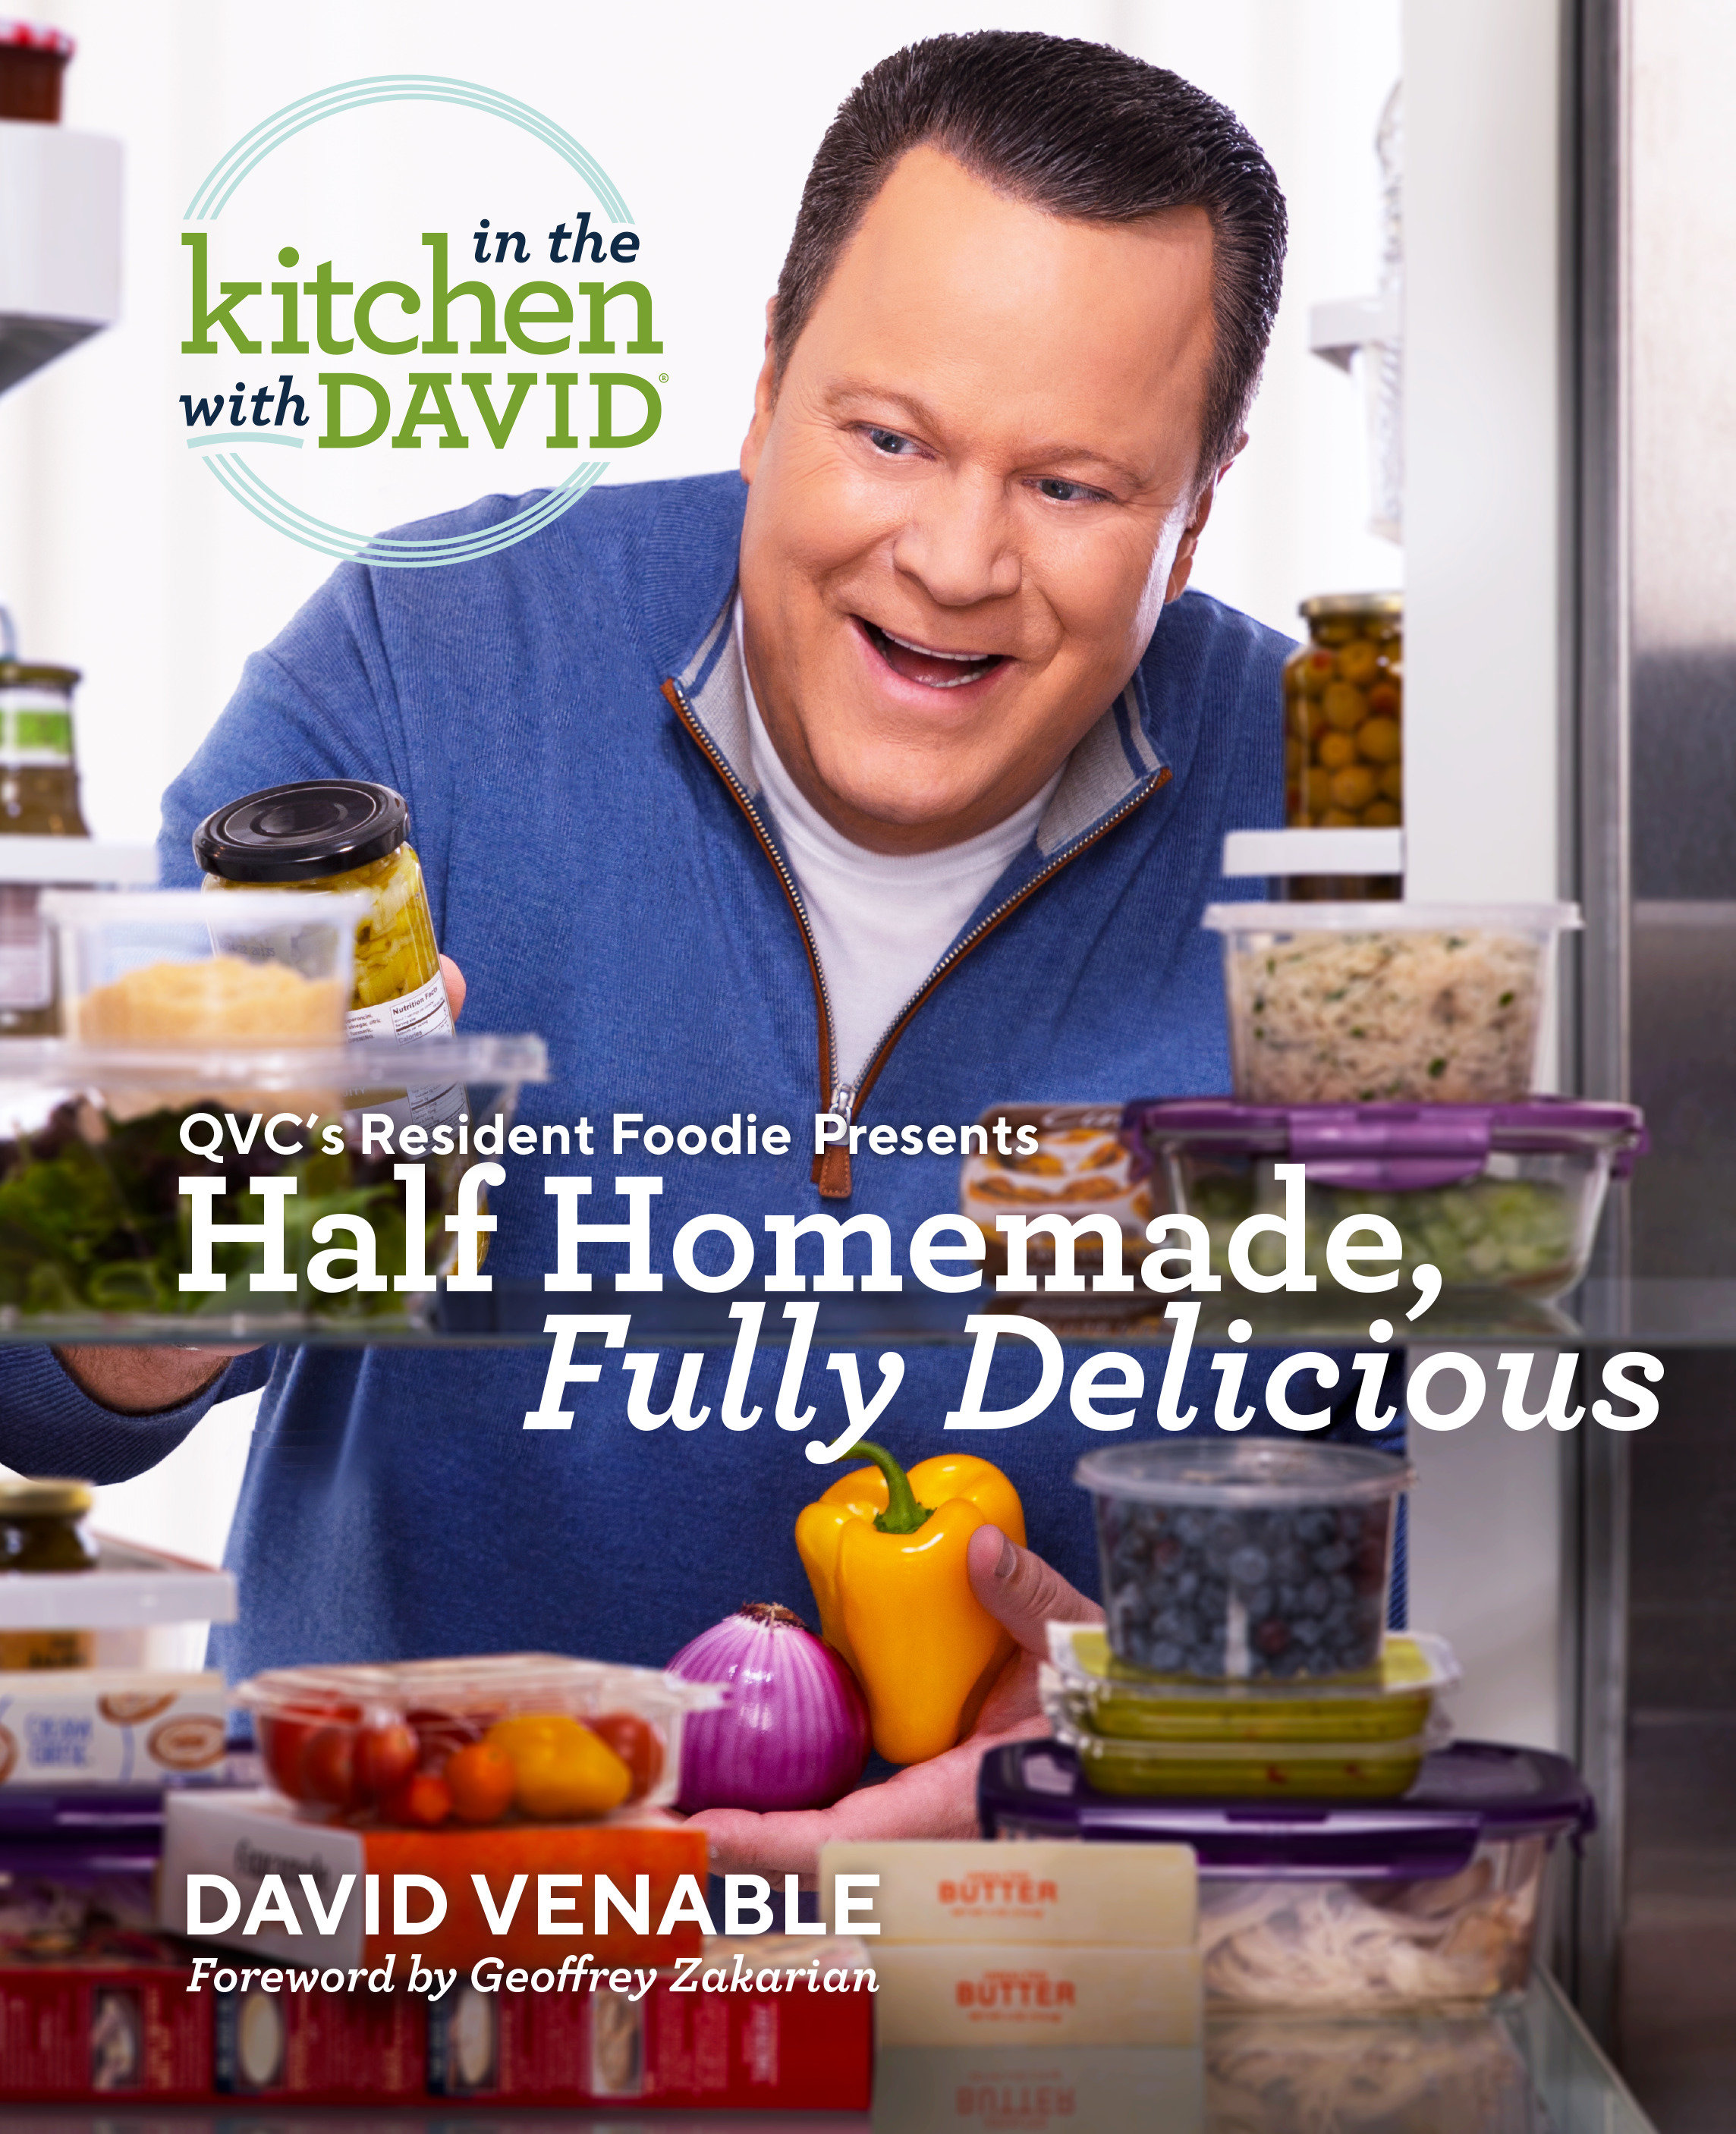 Half Homemade, Fully Delicious: An "In The Kitchen With David" Cookbook From Qvc'S Resident Foodie (Hardcover Book)